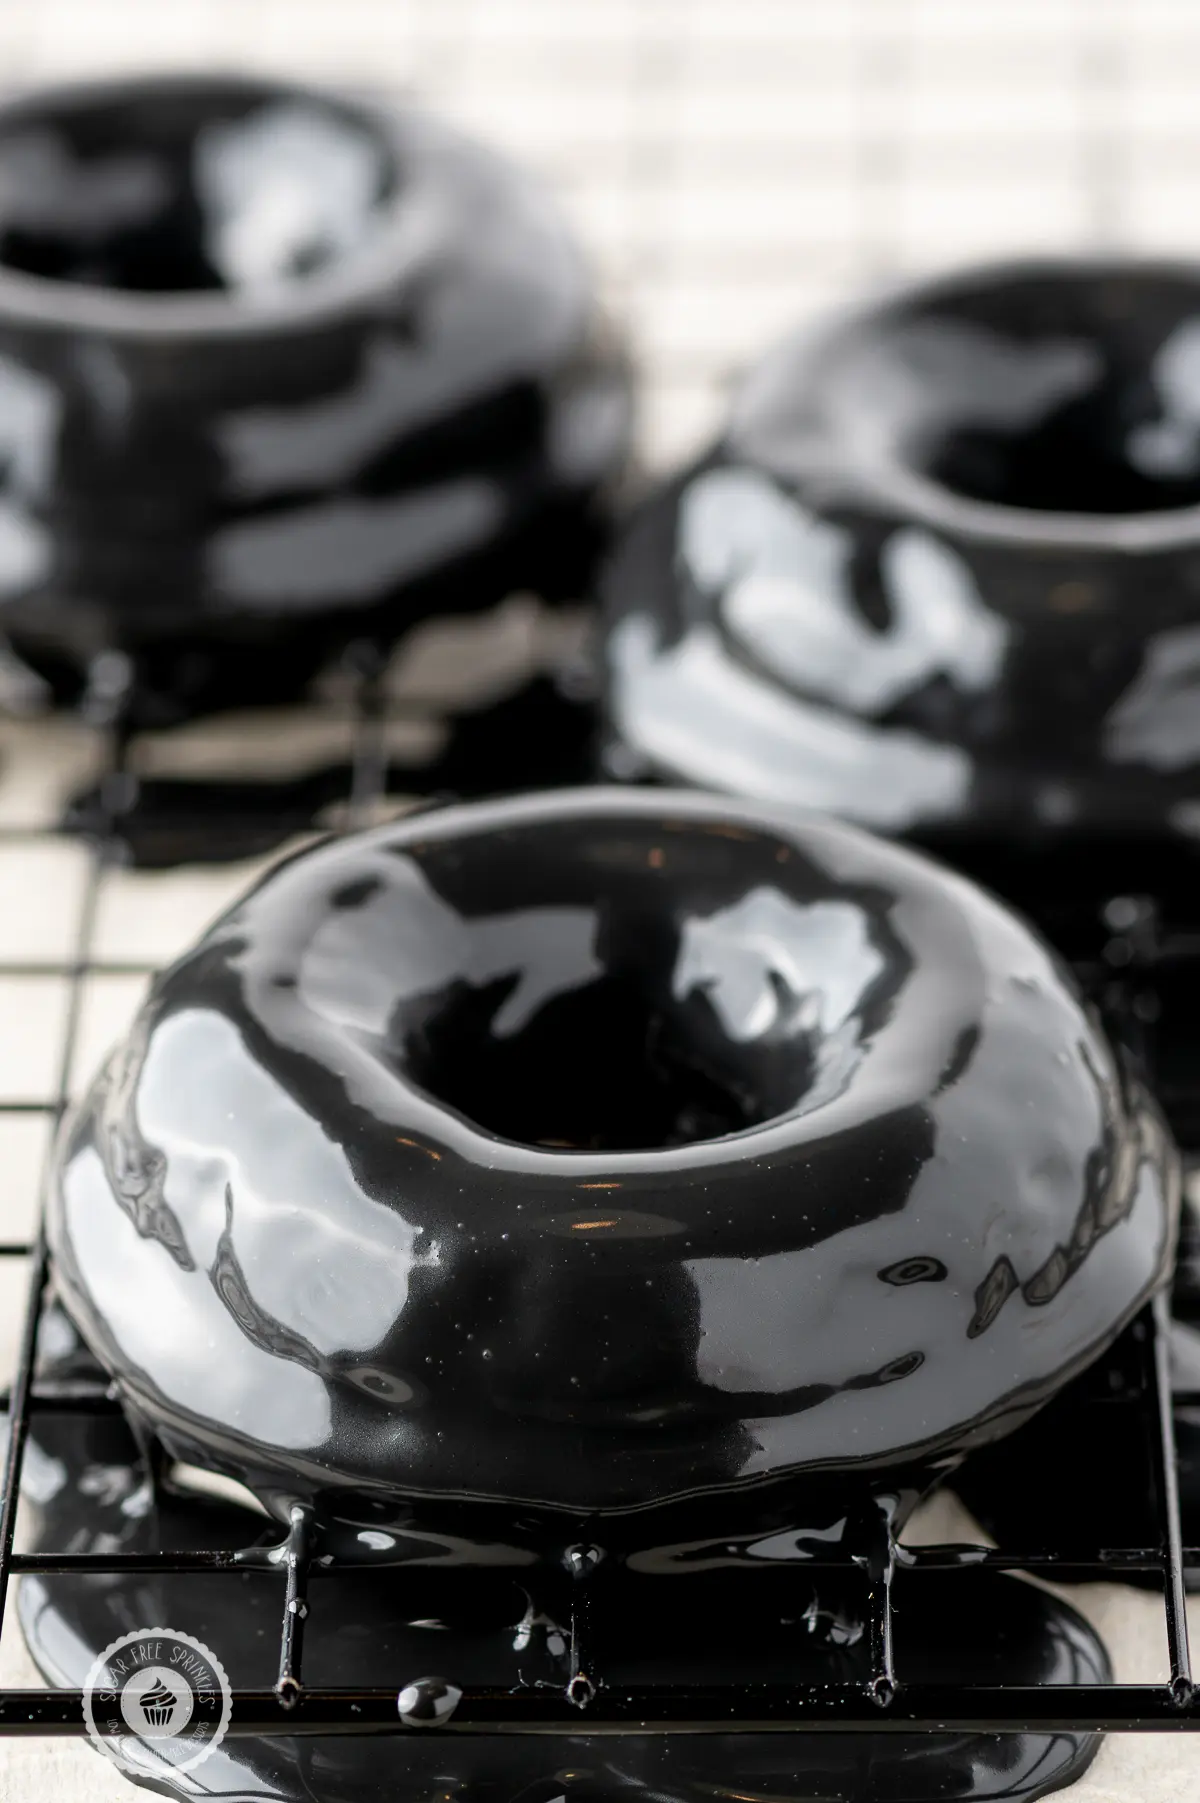 Black shiny ganache coated donuts on a cooling rack 